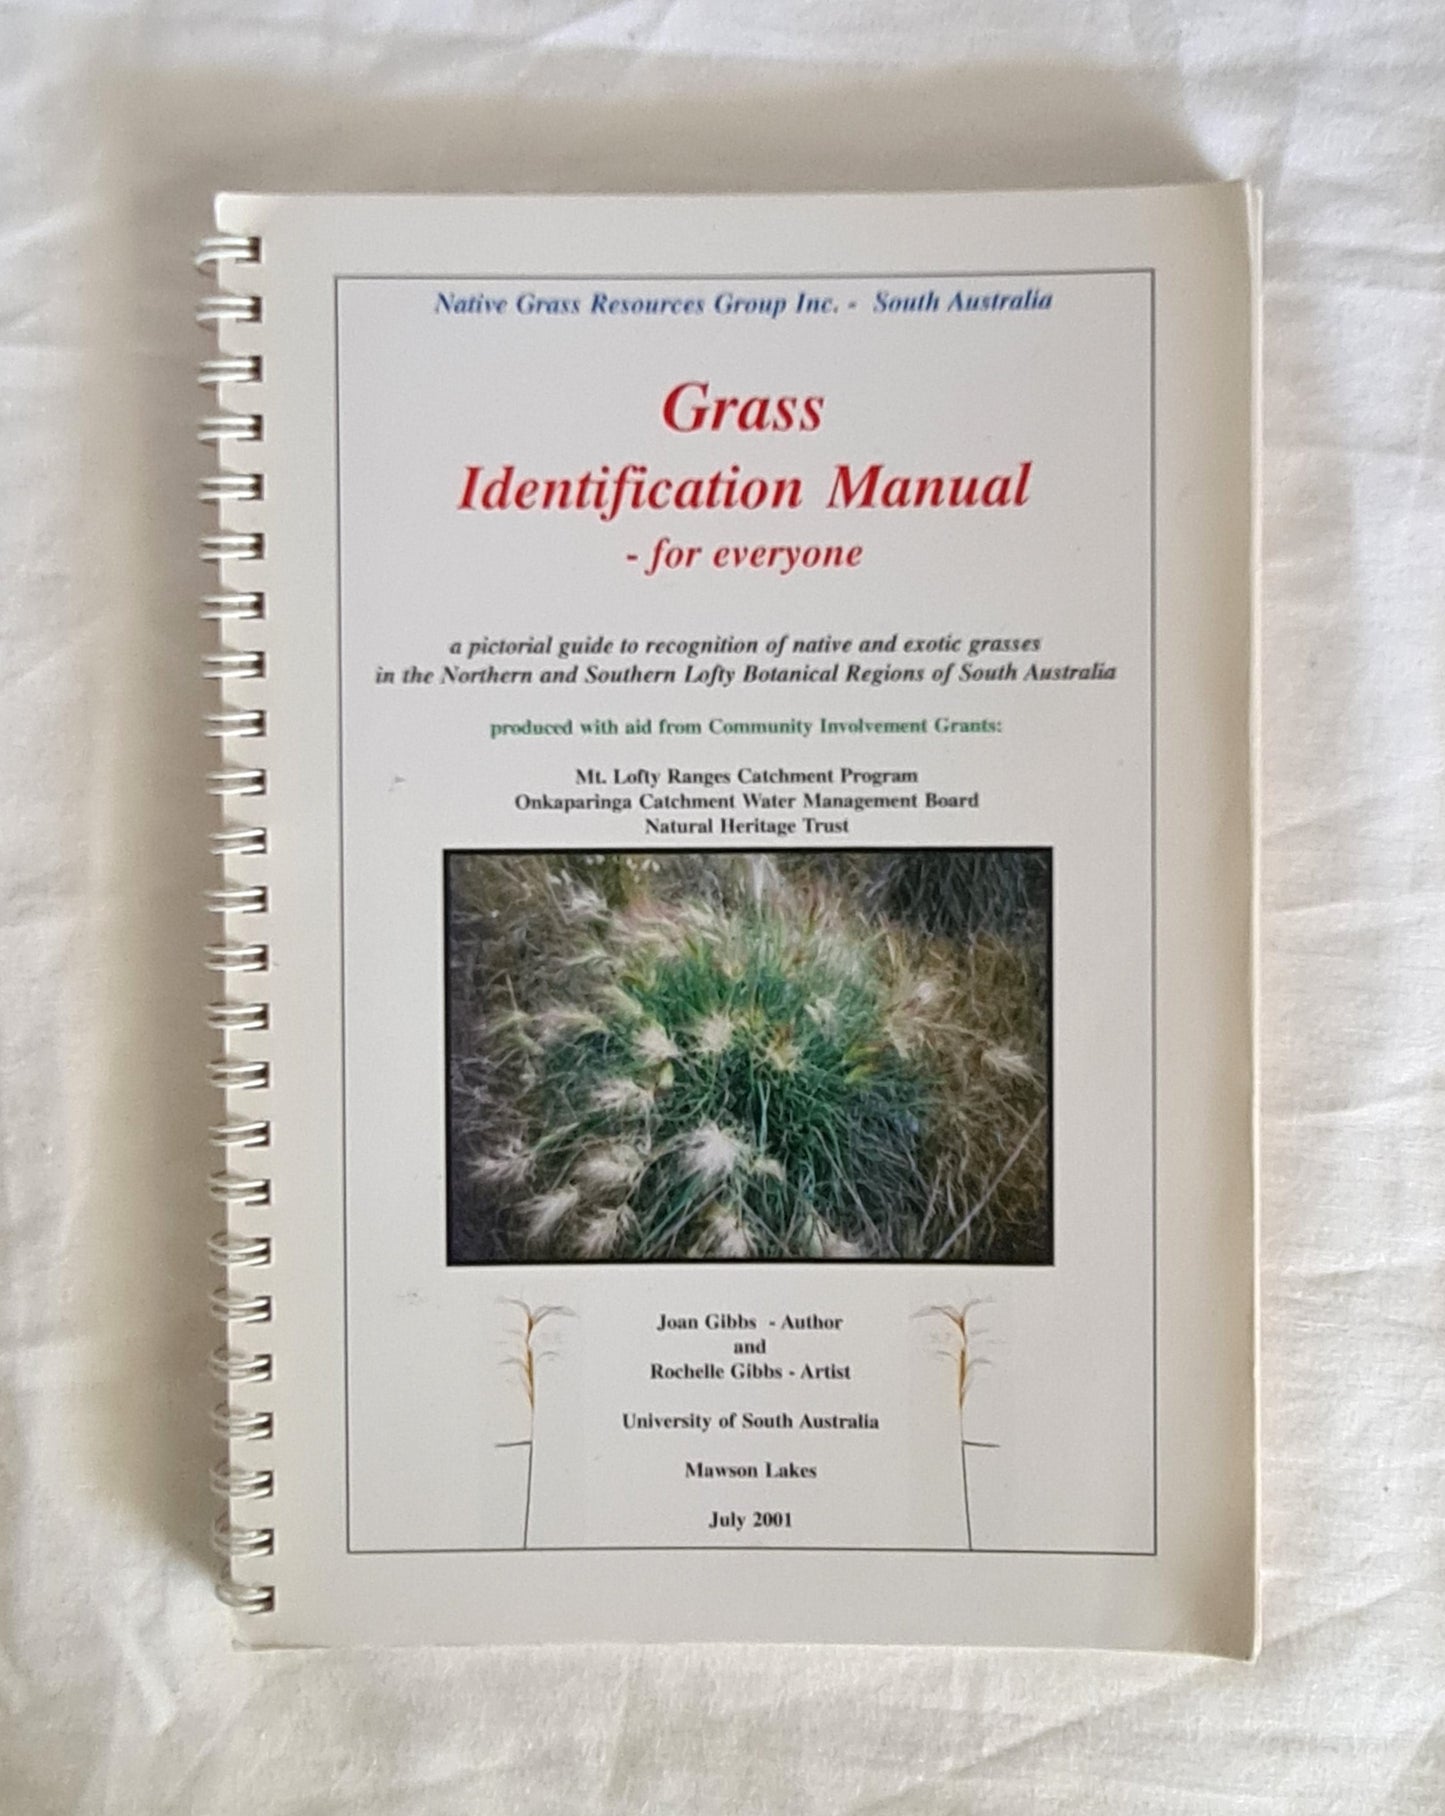 Grass Identification Manual – for everyone  A pictorial guide to recognition of native and exotic grasses in the Northern and Southern Lofty Botanical Regions of South Australia  by Joan Gibbs  Illustrated by Rochelle Gibbs